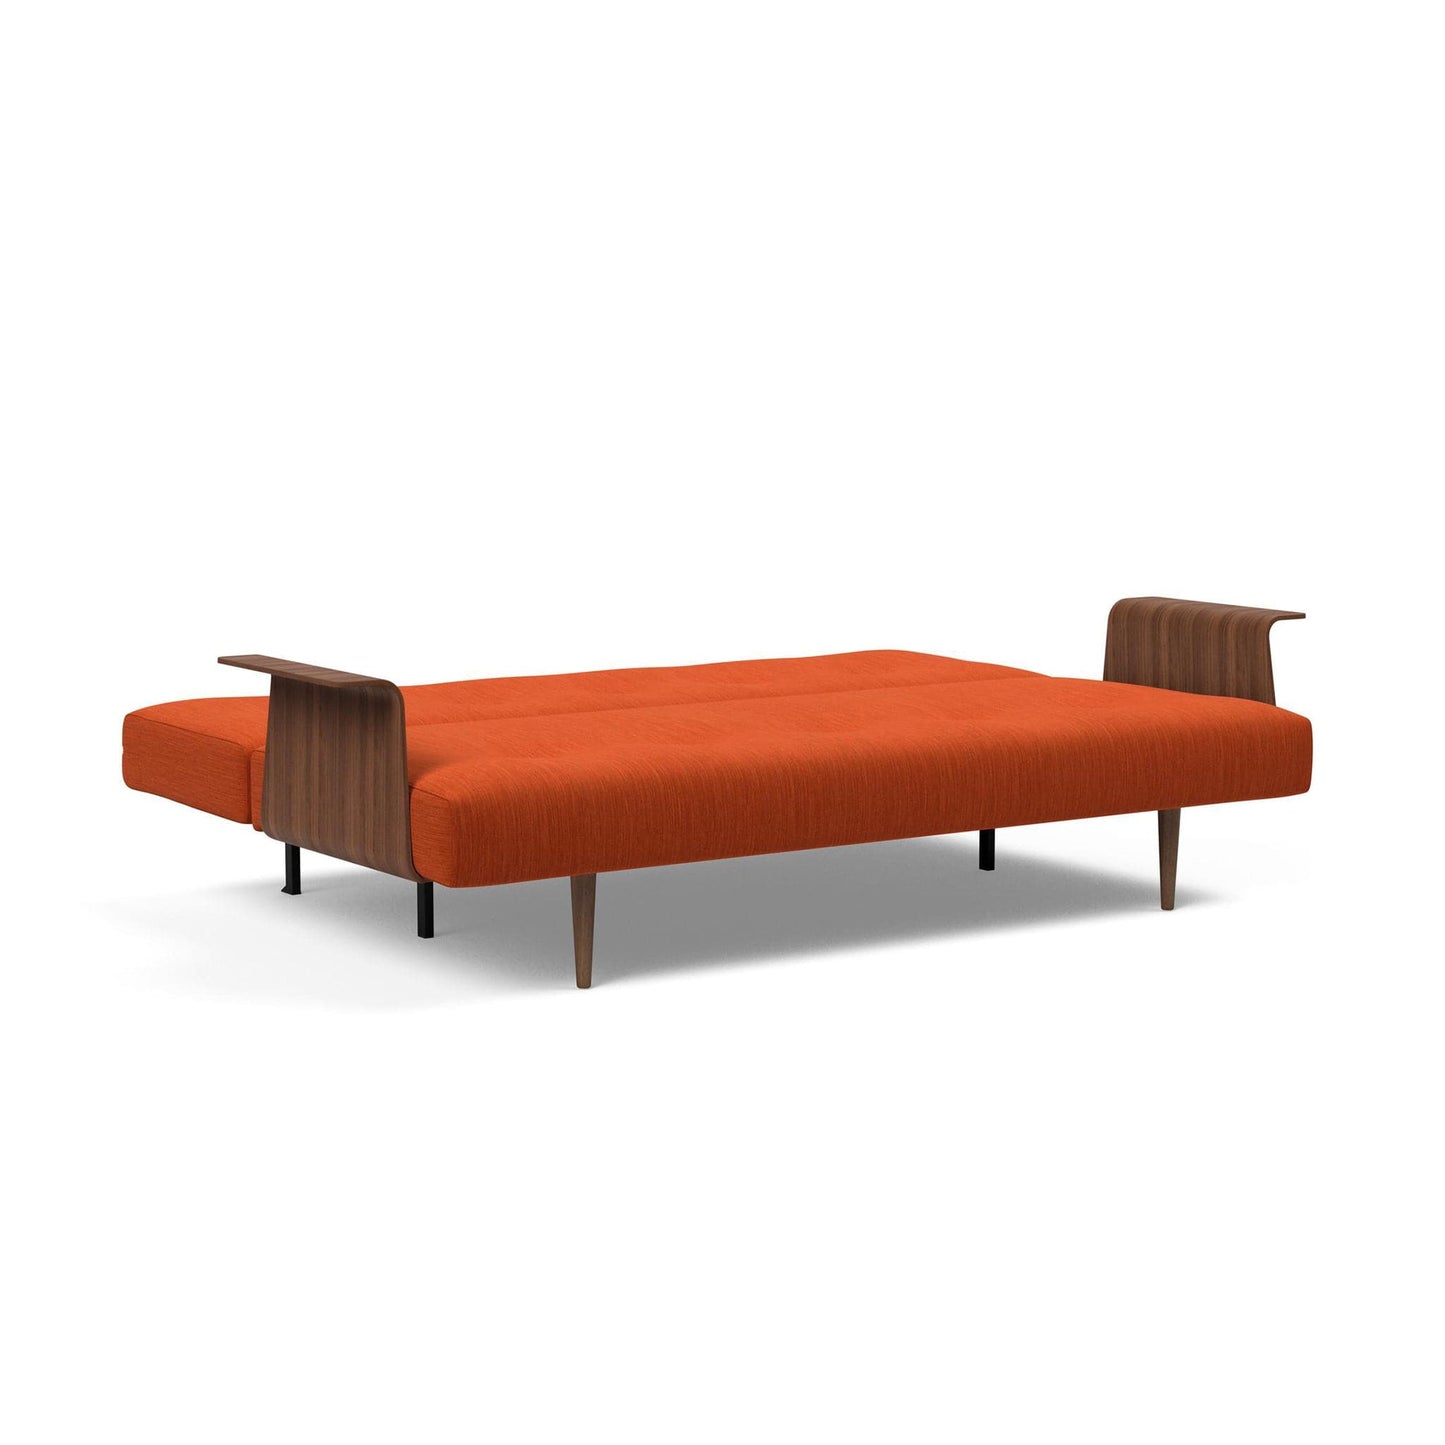 Recast Plus Sofa Bed With Arms